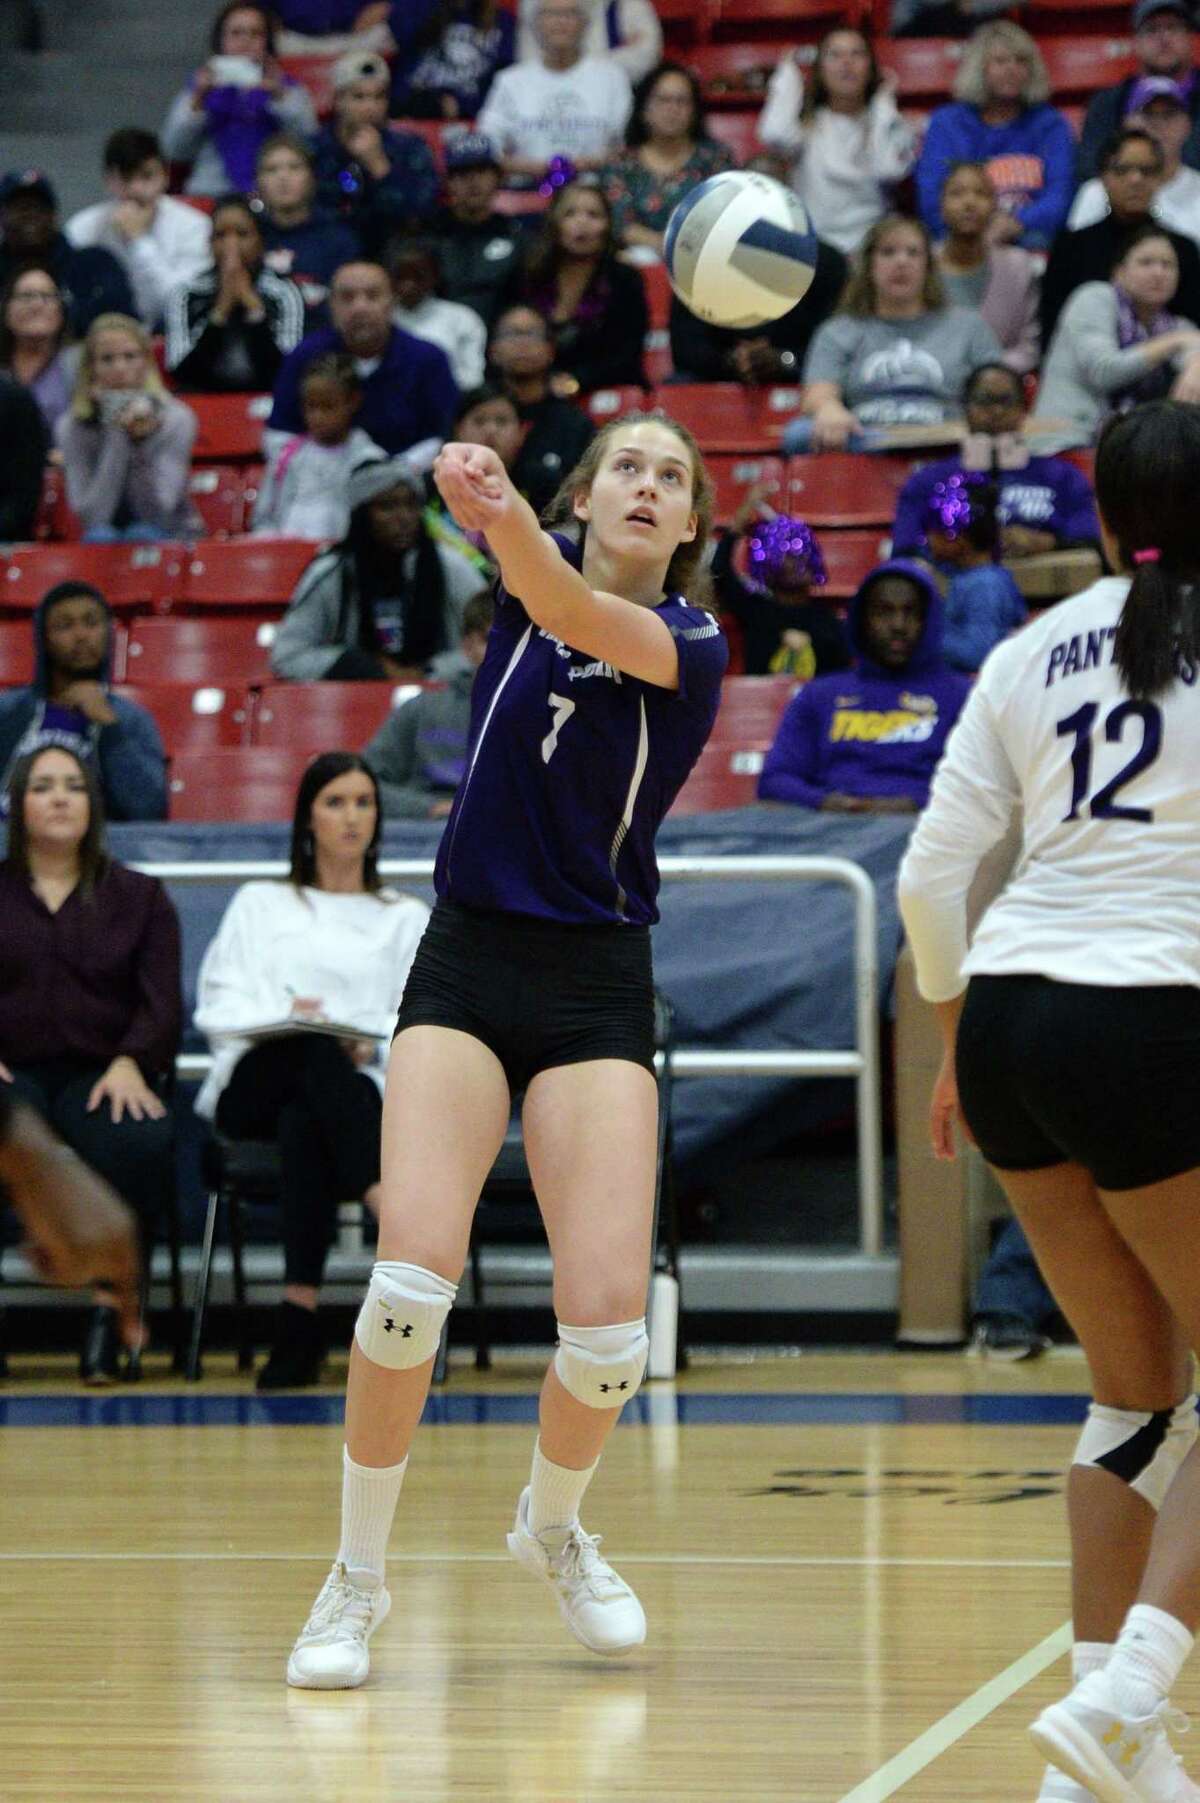 Sydney Jordan (7) of Ridge Point digs for a ball during the first set of the Region III-6A Final volleyball match between the Ridge Point Panthers and the Cy-Fair Bobcats on Saturday, November 16, 2019 at Wheeler Fieldhouse, Sugar Land, TX.